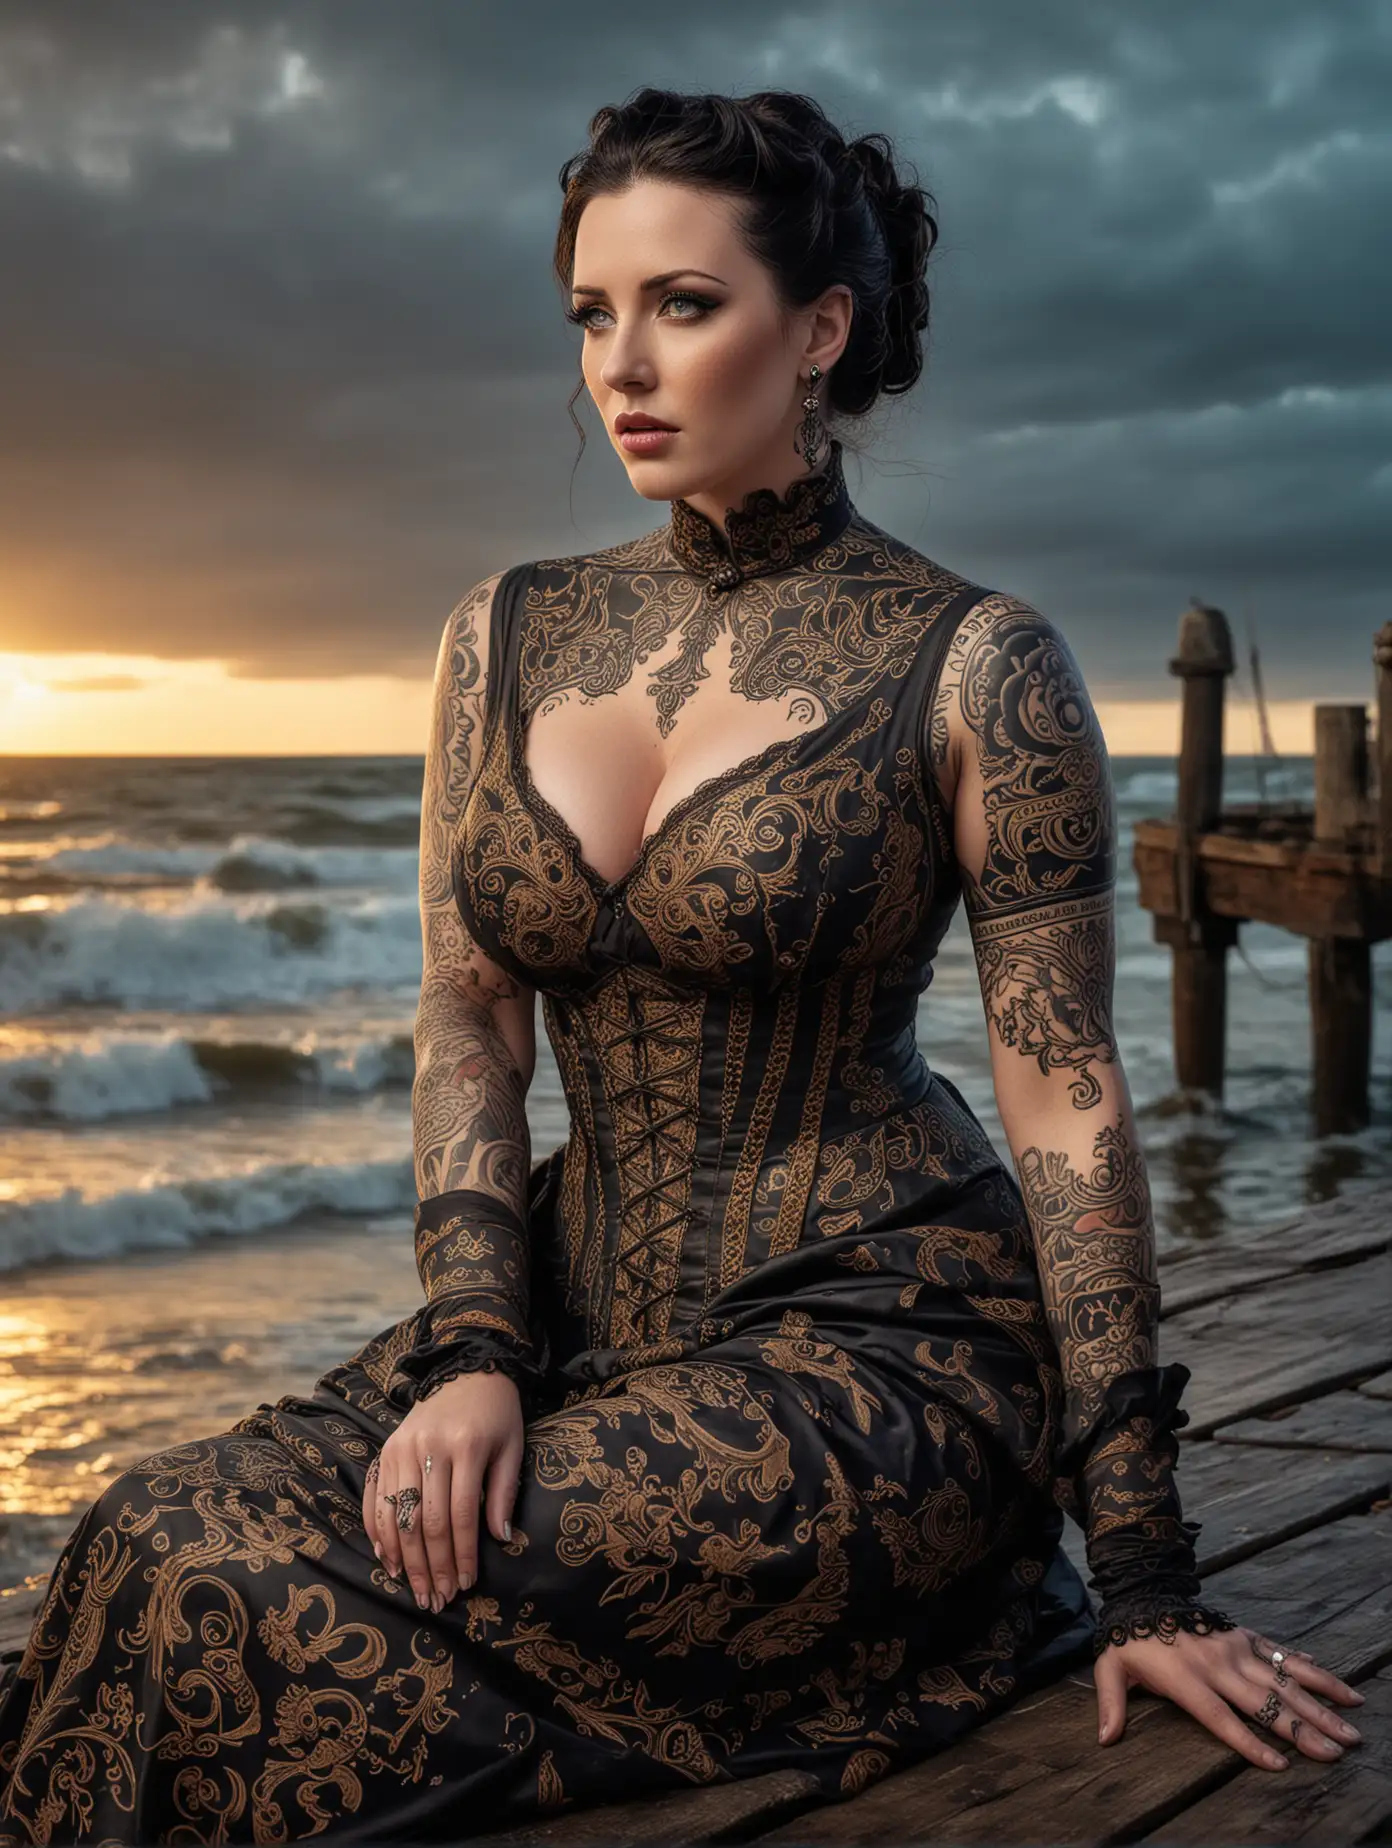 A portrait of beautiful Angela White wears Victorian fighter dress with amazing tattoo, adorned with Baroque tattoos sitting on an old wooden harbour when a stormy beach at sunset, in an opulent dress, with filigree patterns on her skin, contrasting with the huge waves of ocean, fantasy theme, fantasy art.